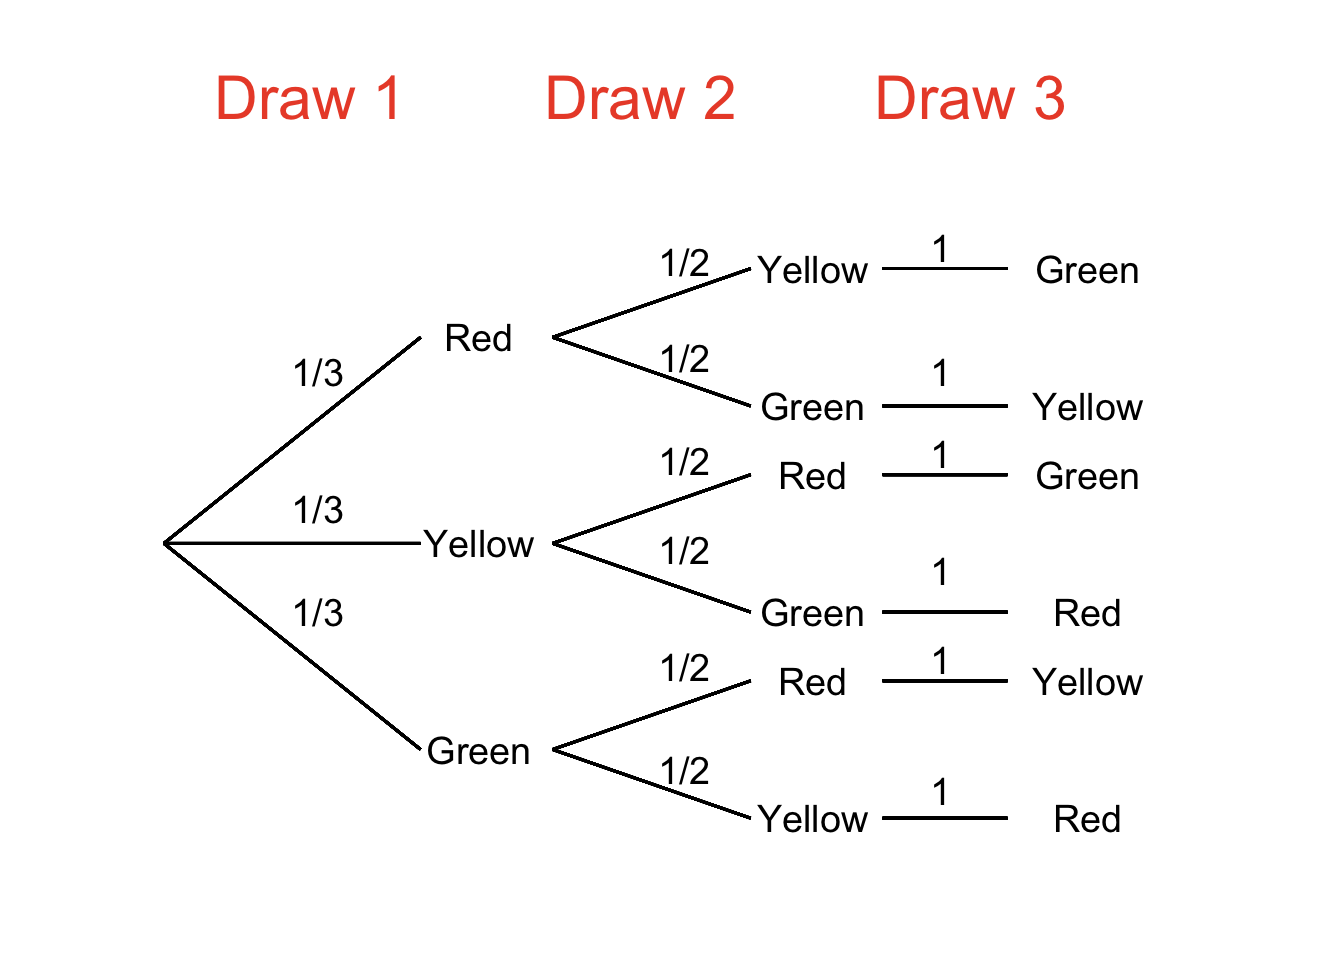 Probability Tree Depicting Sampling Without Replacement